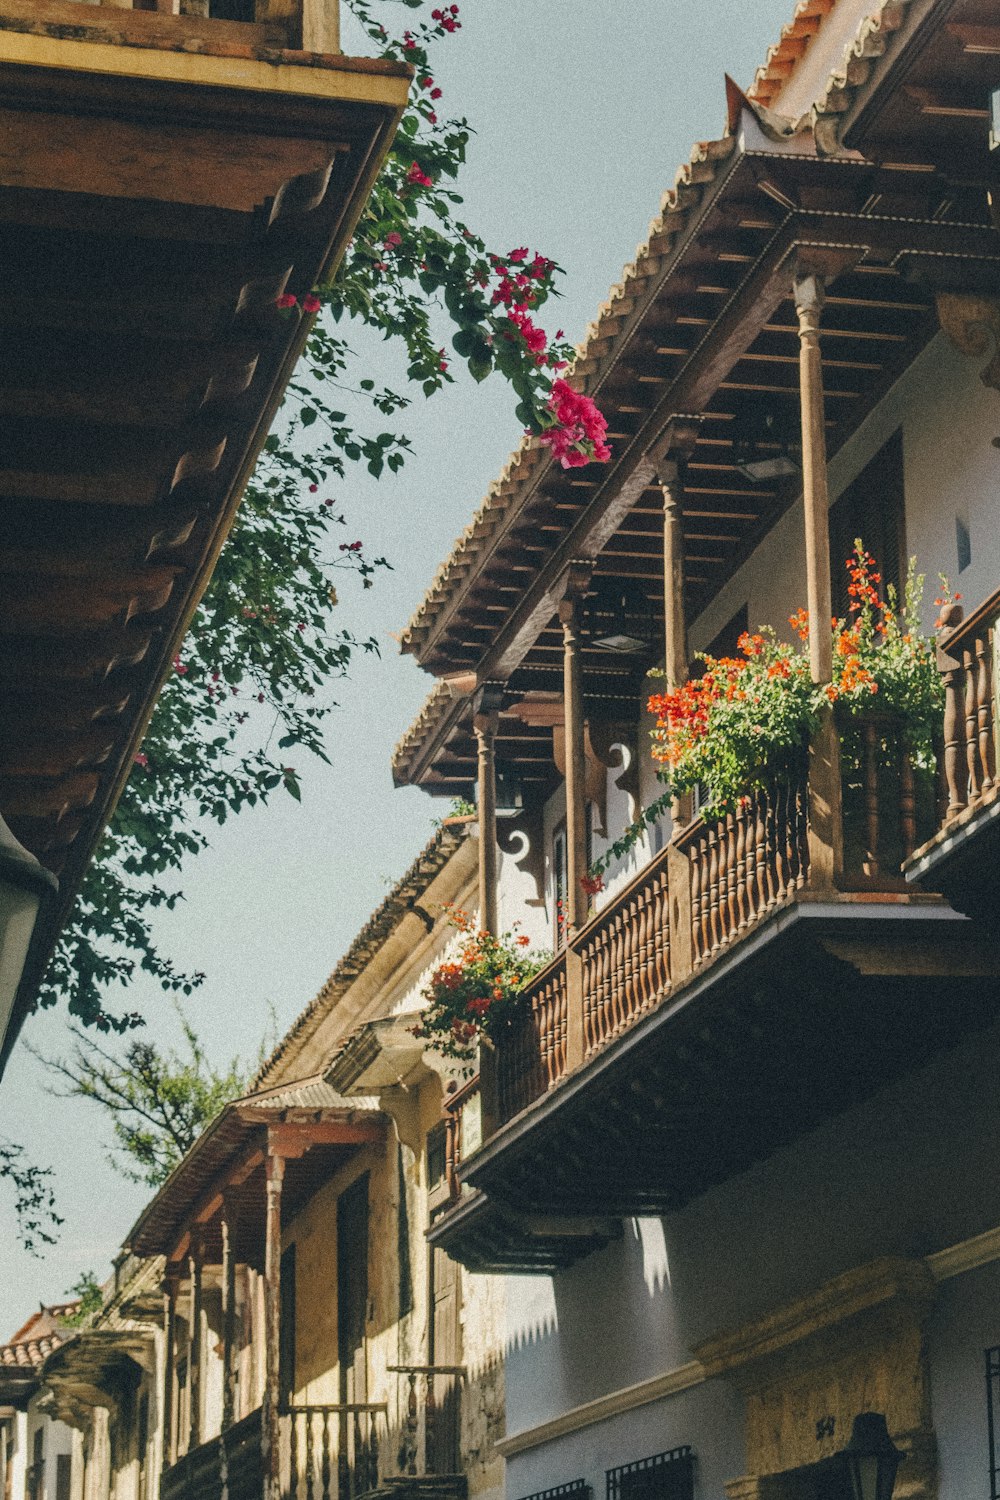 a row of buildings with balconies and flowers on the balconies